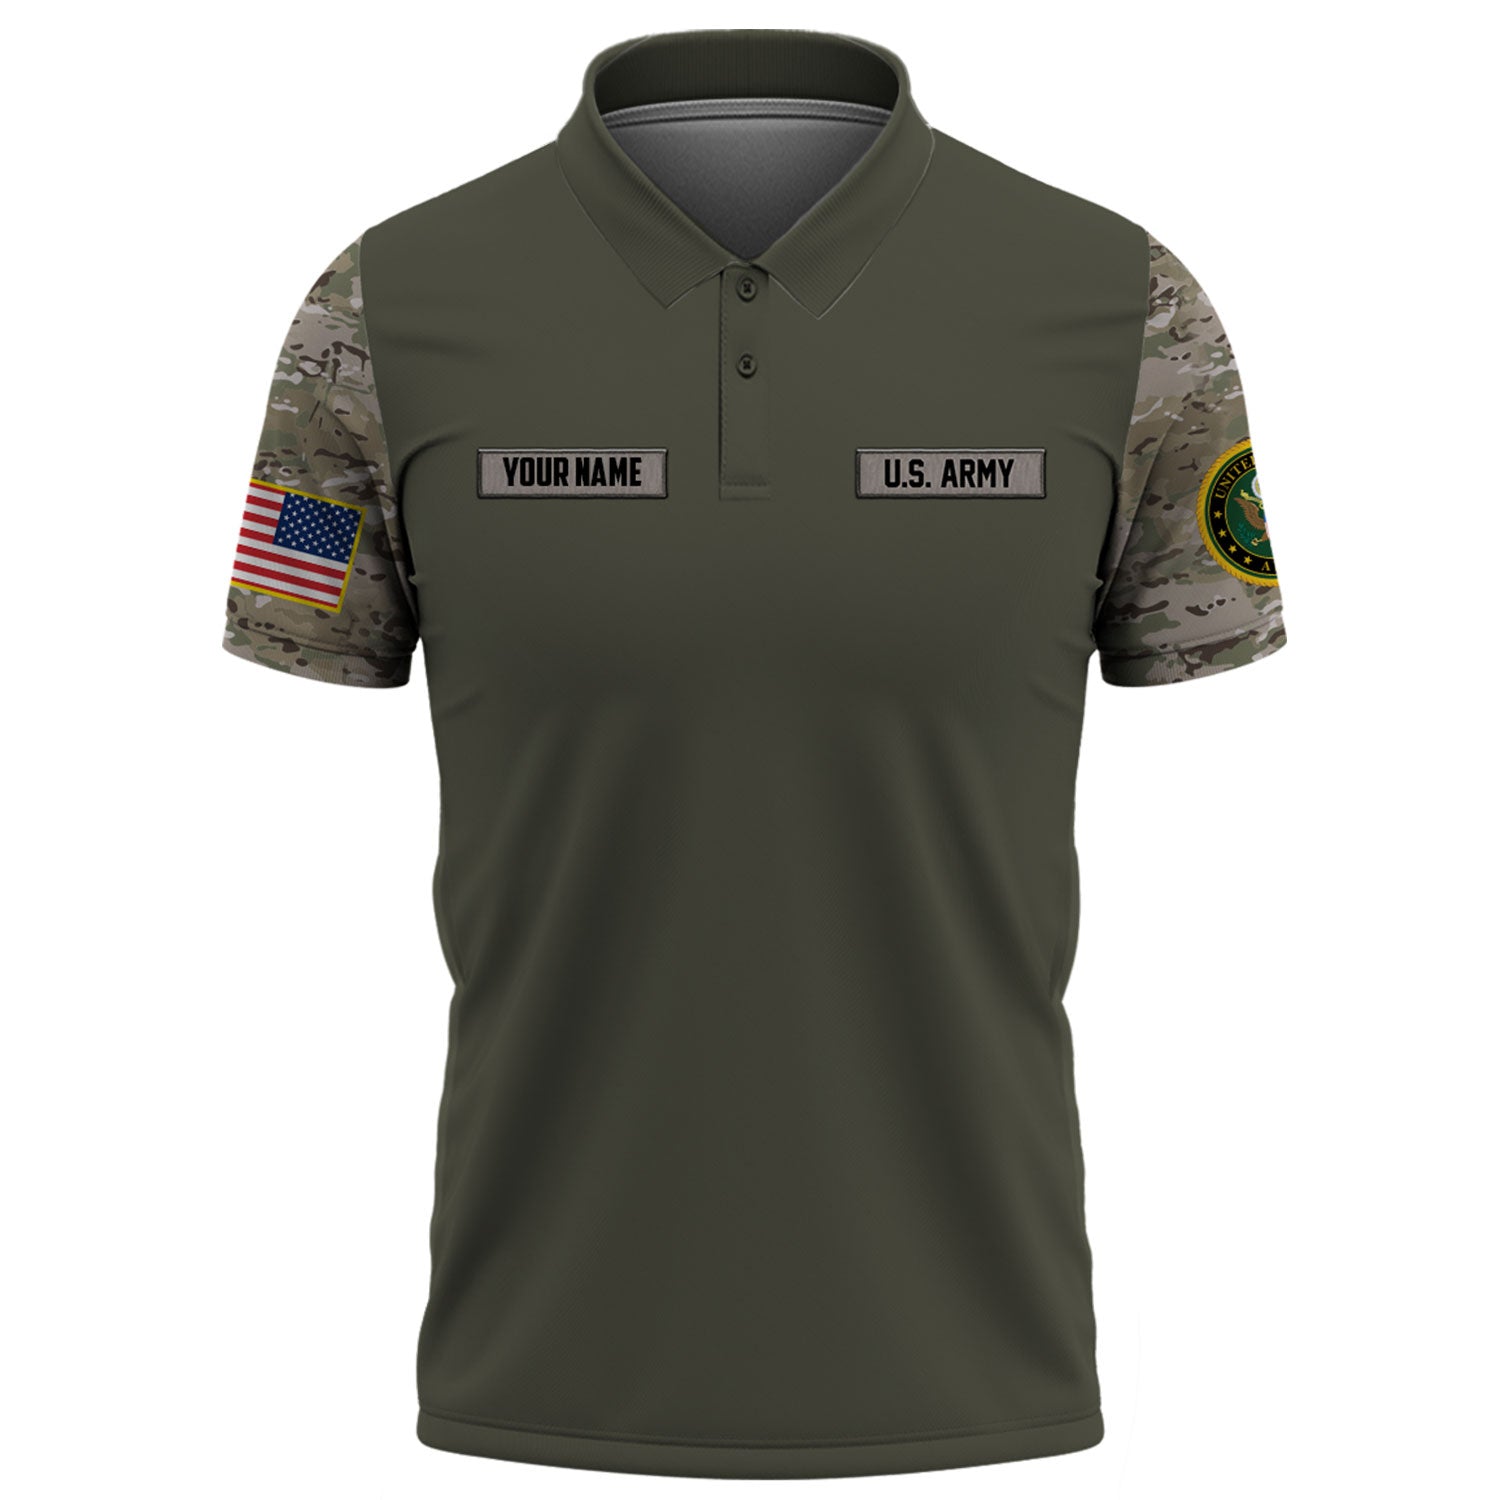 Death Smiles At All Of Us - Only The Veterans Smile Back - Customized U.S. Veteran Polo Shirt, Gift For Veterans